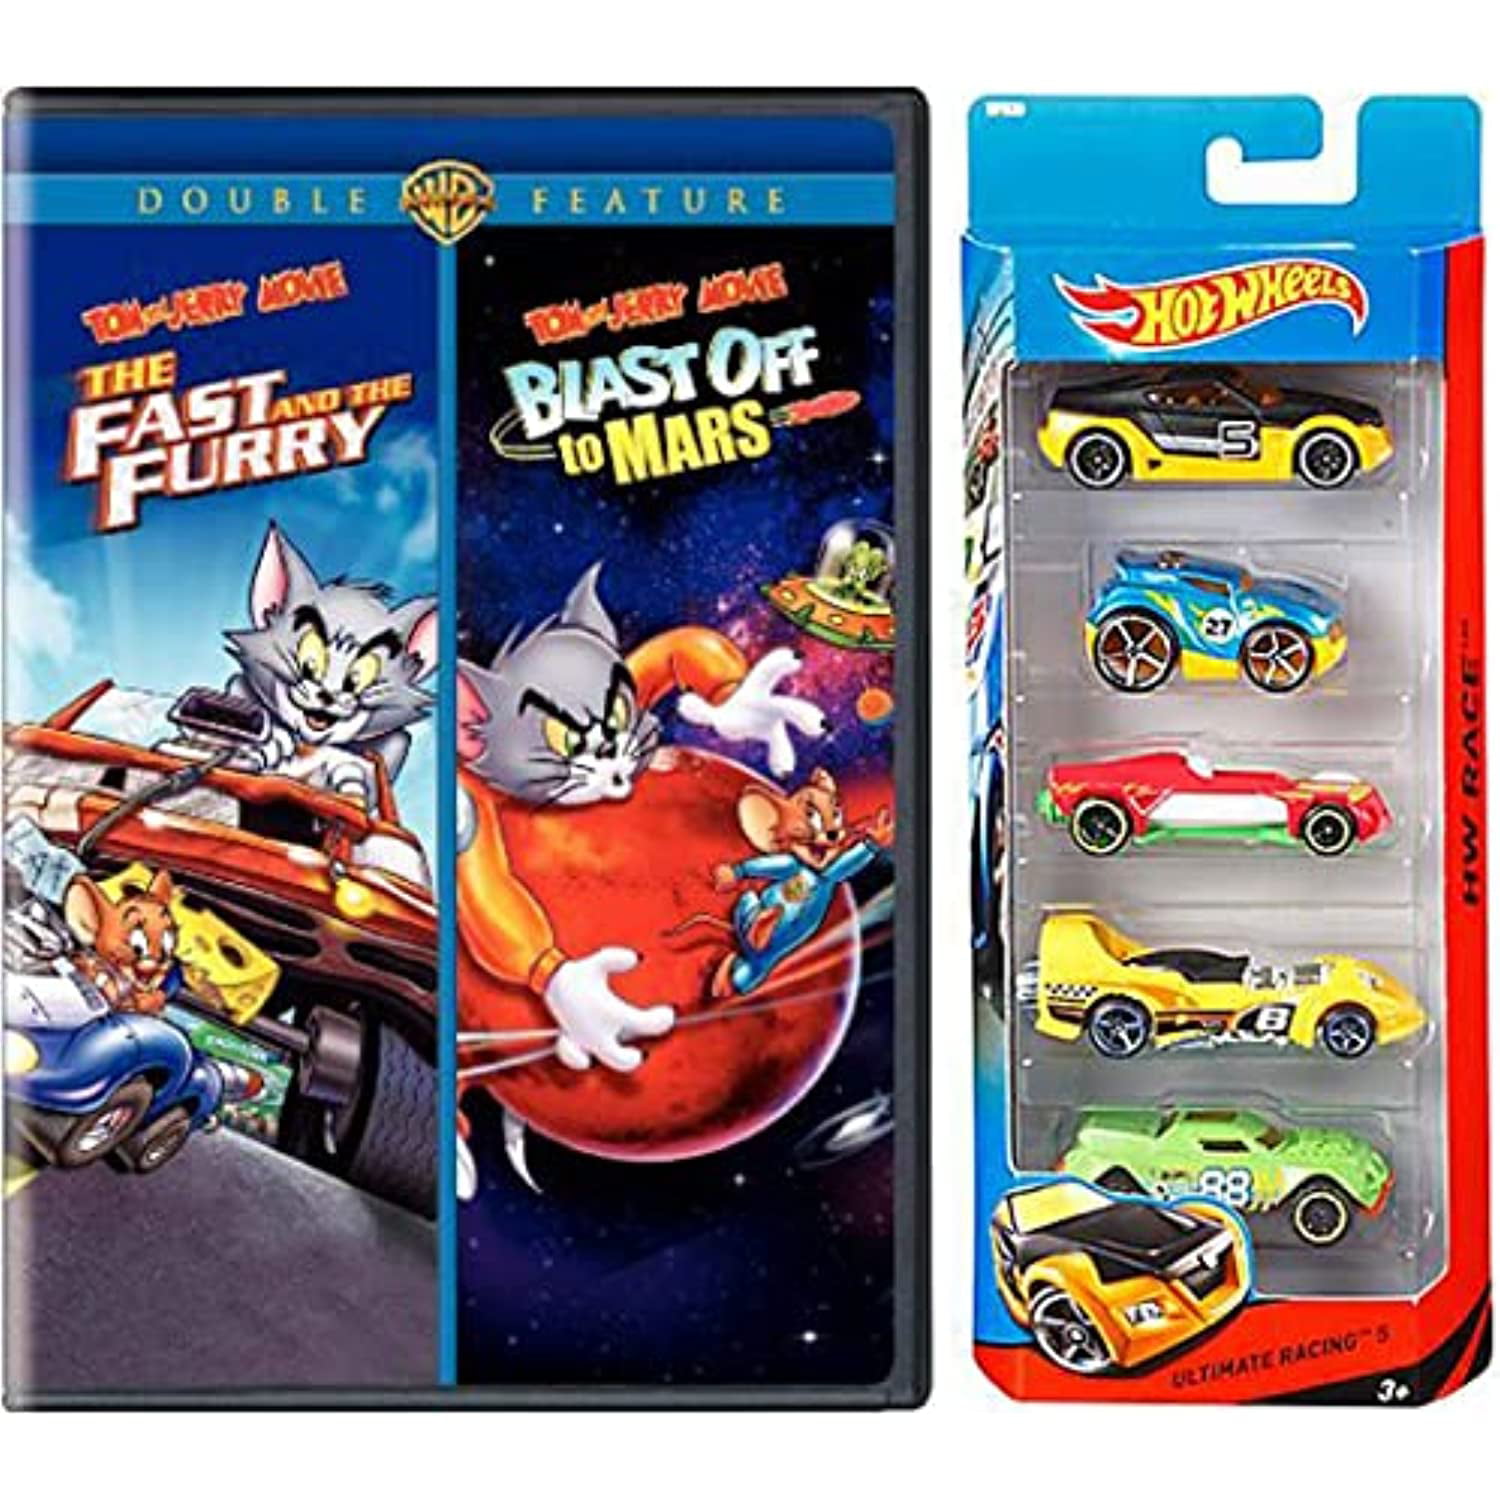 Cat & Mouse Animated Movies The Fast And The Furry Tom & Jerry Dvd  CollectionBlast Off To Mars! Cartoon Feature Bundle Movie Set Hot Wheels  Action 5 Pack Racers 